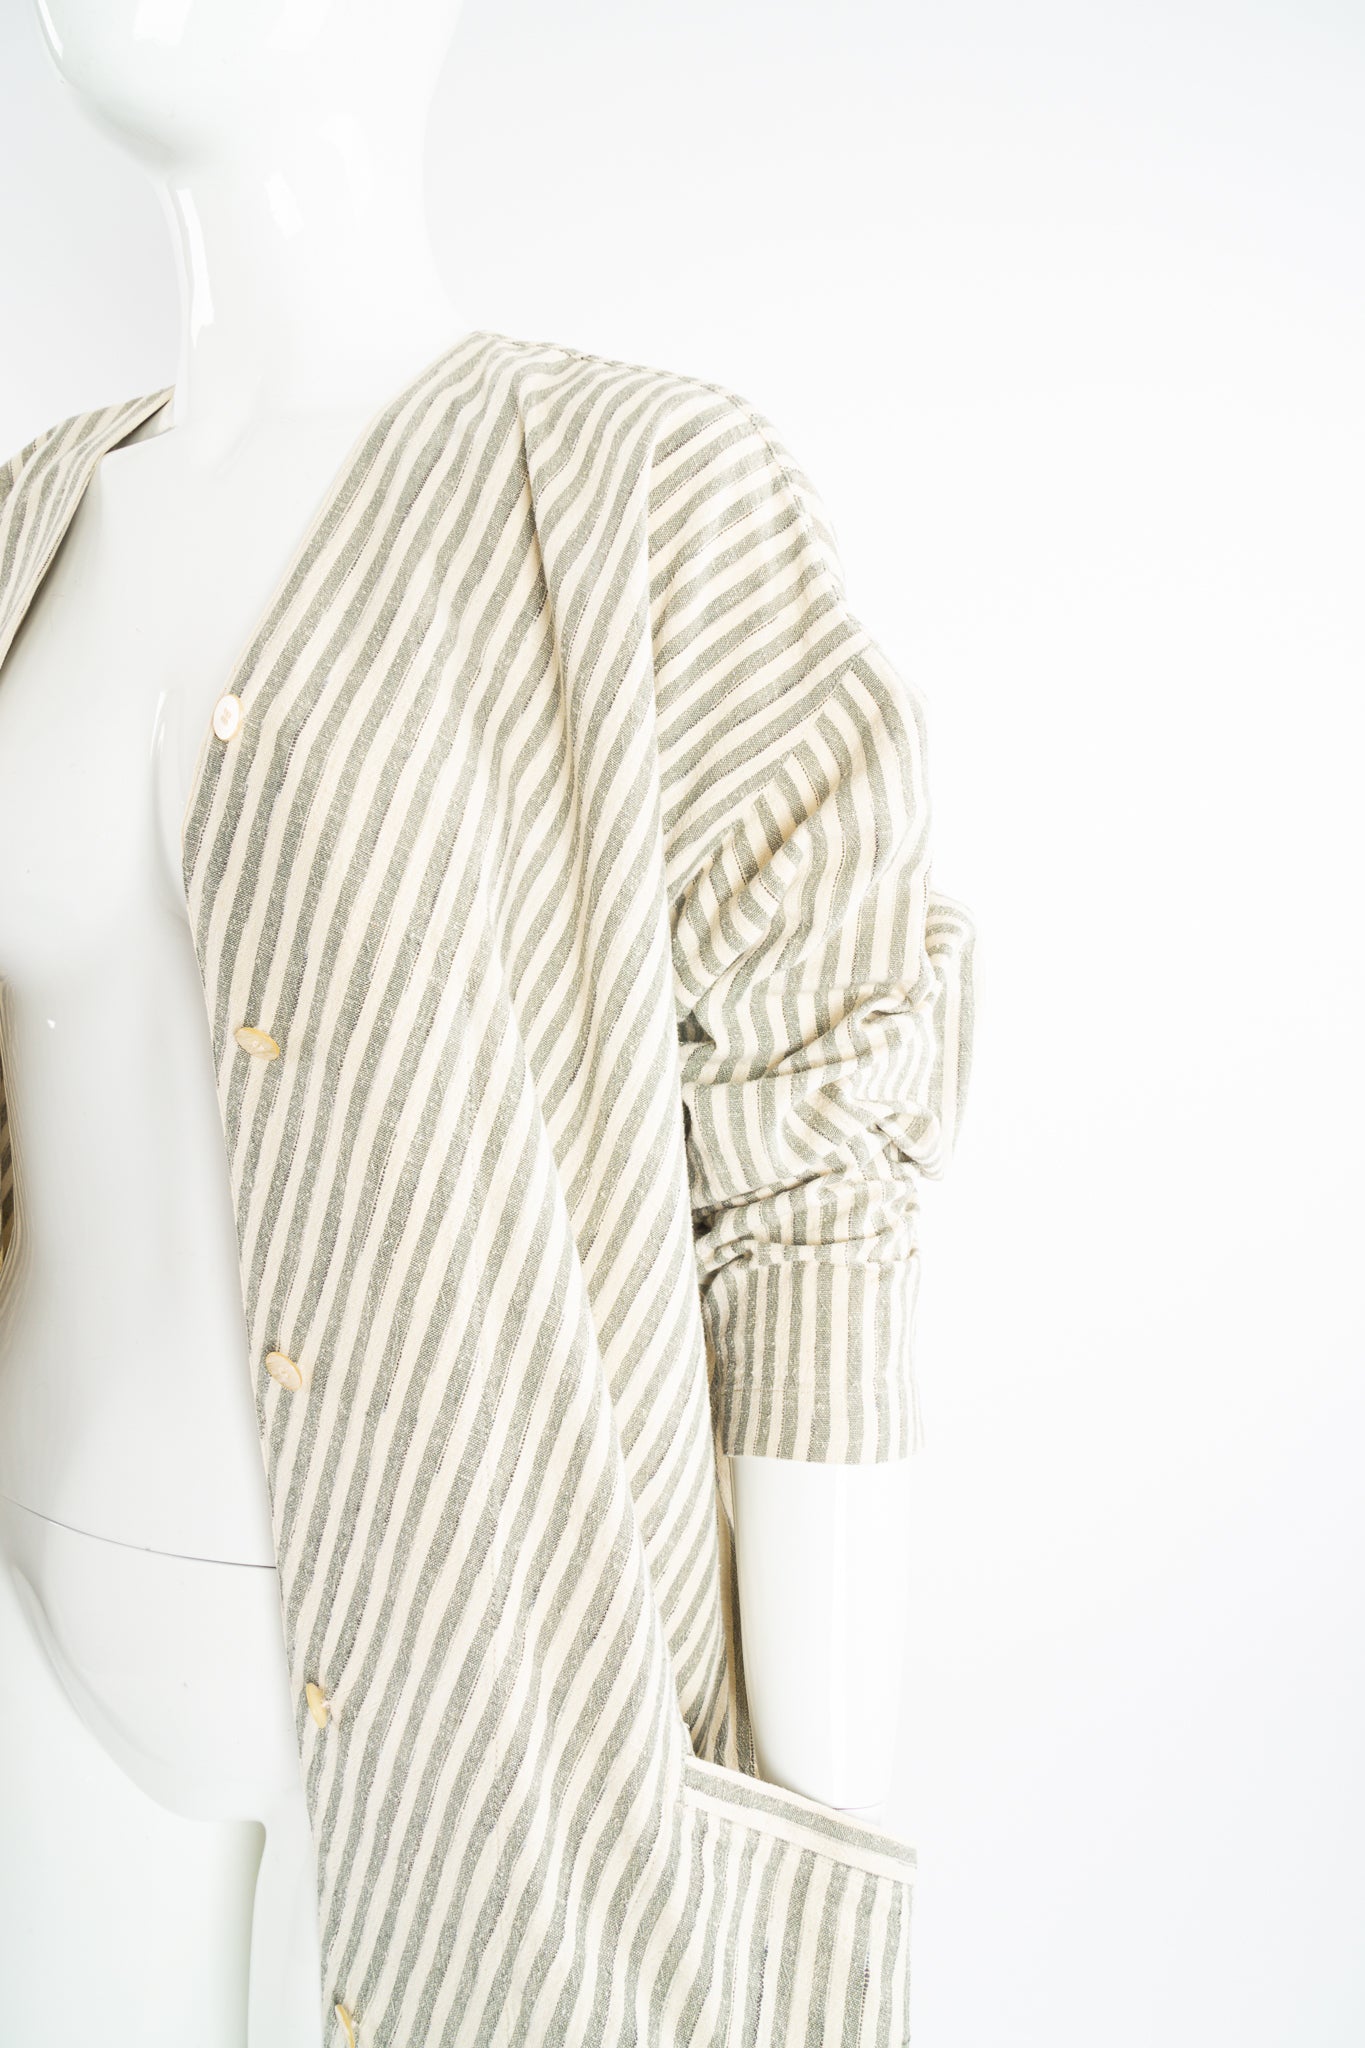 Vintage Issey Miyake Cotton Striped Duster Jacket on Mannequin pocket crop at Recess Los Angeles